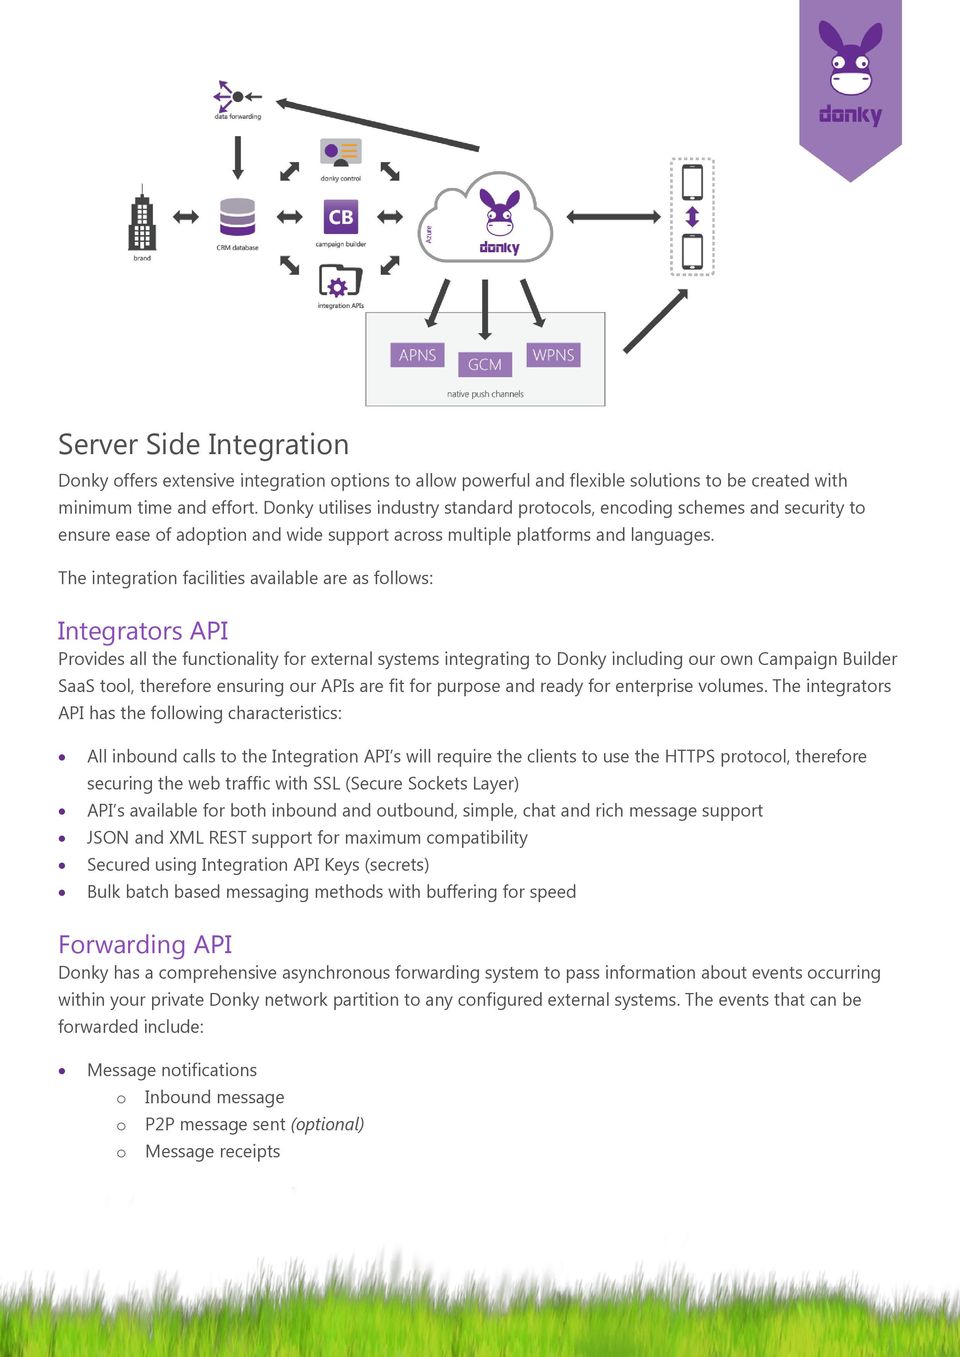 The integration facilities available are as follows: Integrators API Provides all the functionality for external systems integrating to Donky including our own Campaign Builder SaaS tool, therefore